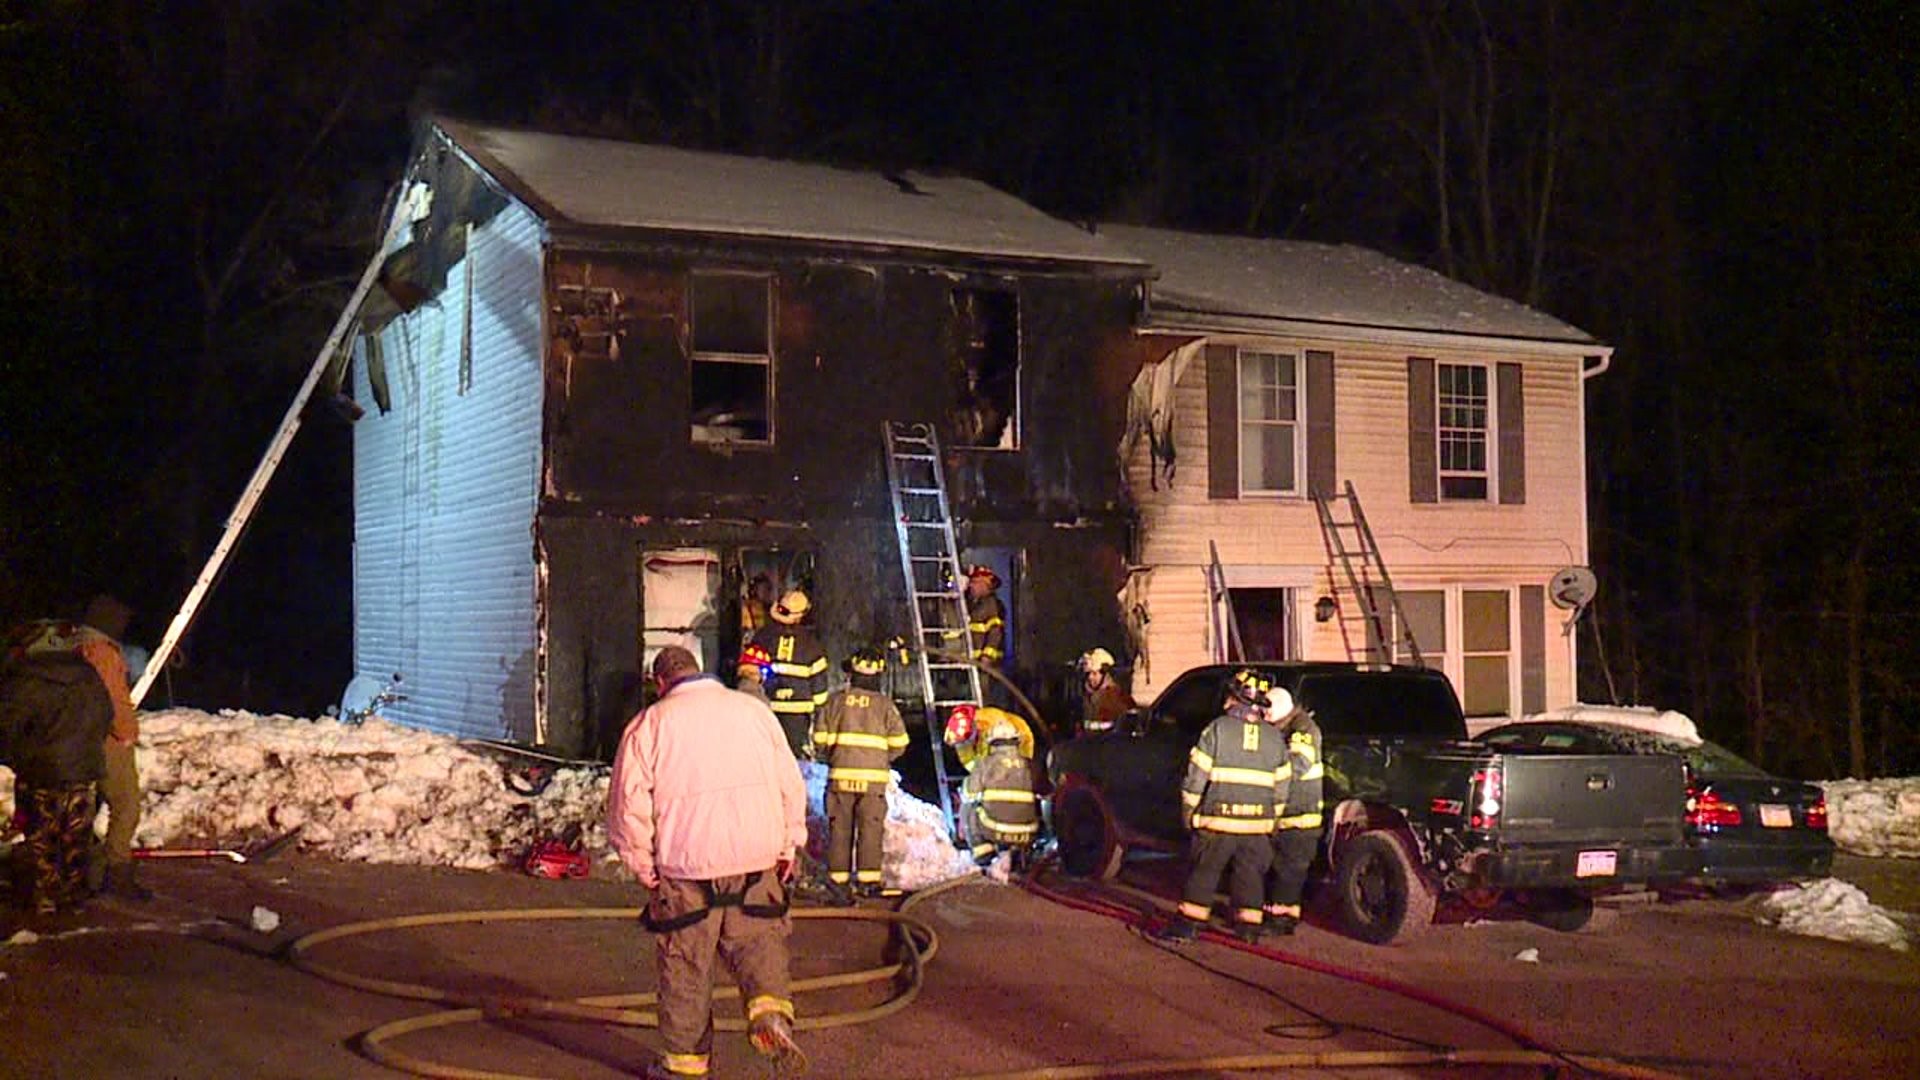 Fire Officials Believe Generator Sparked Flames at Honesdale Home